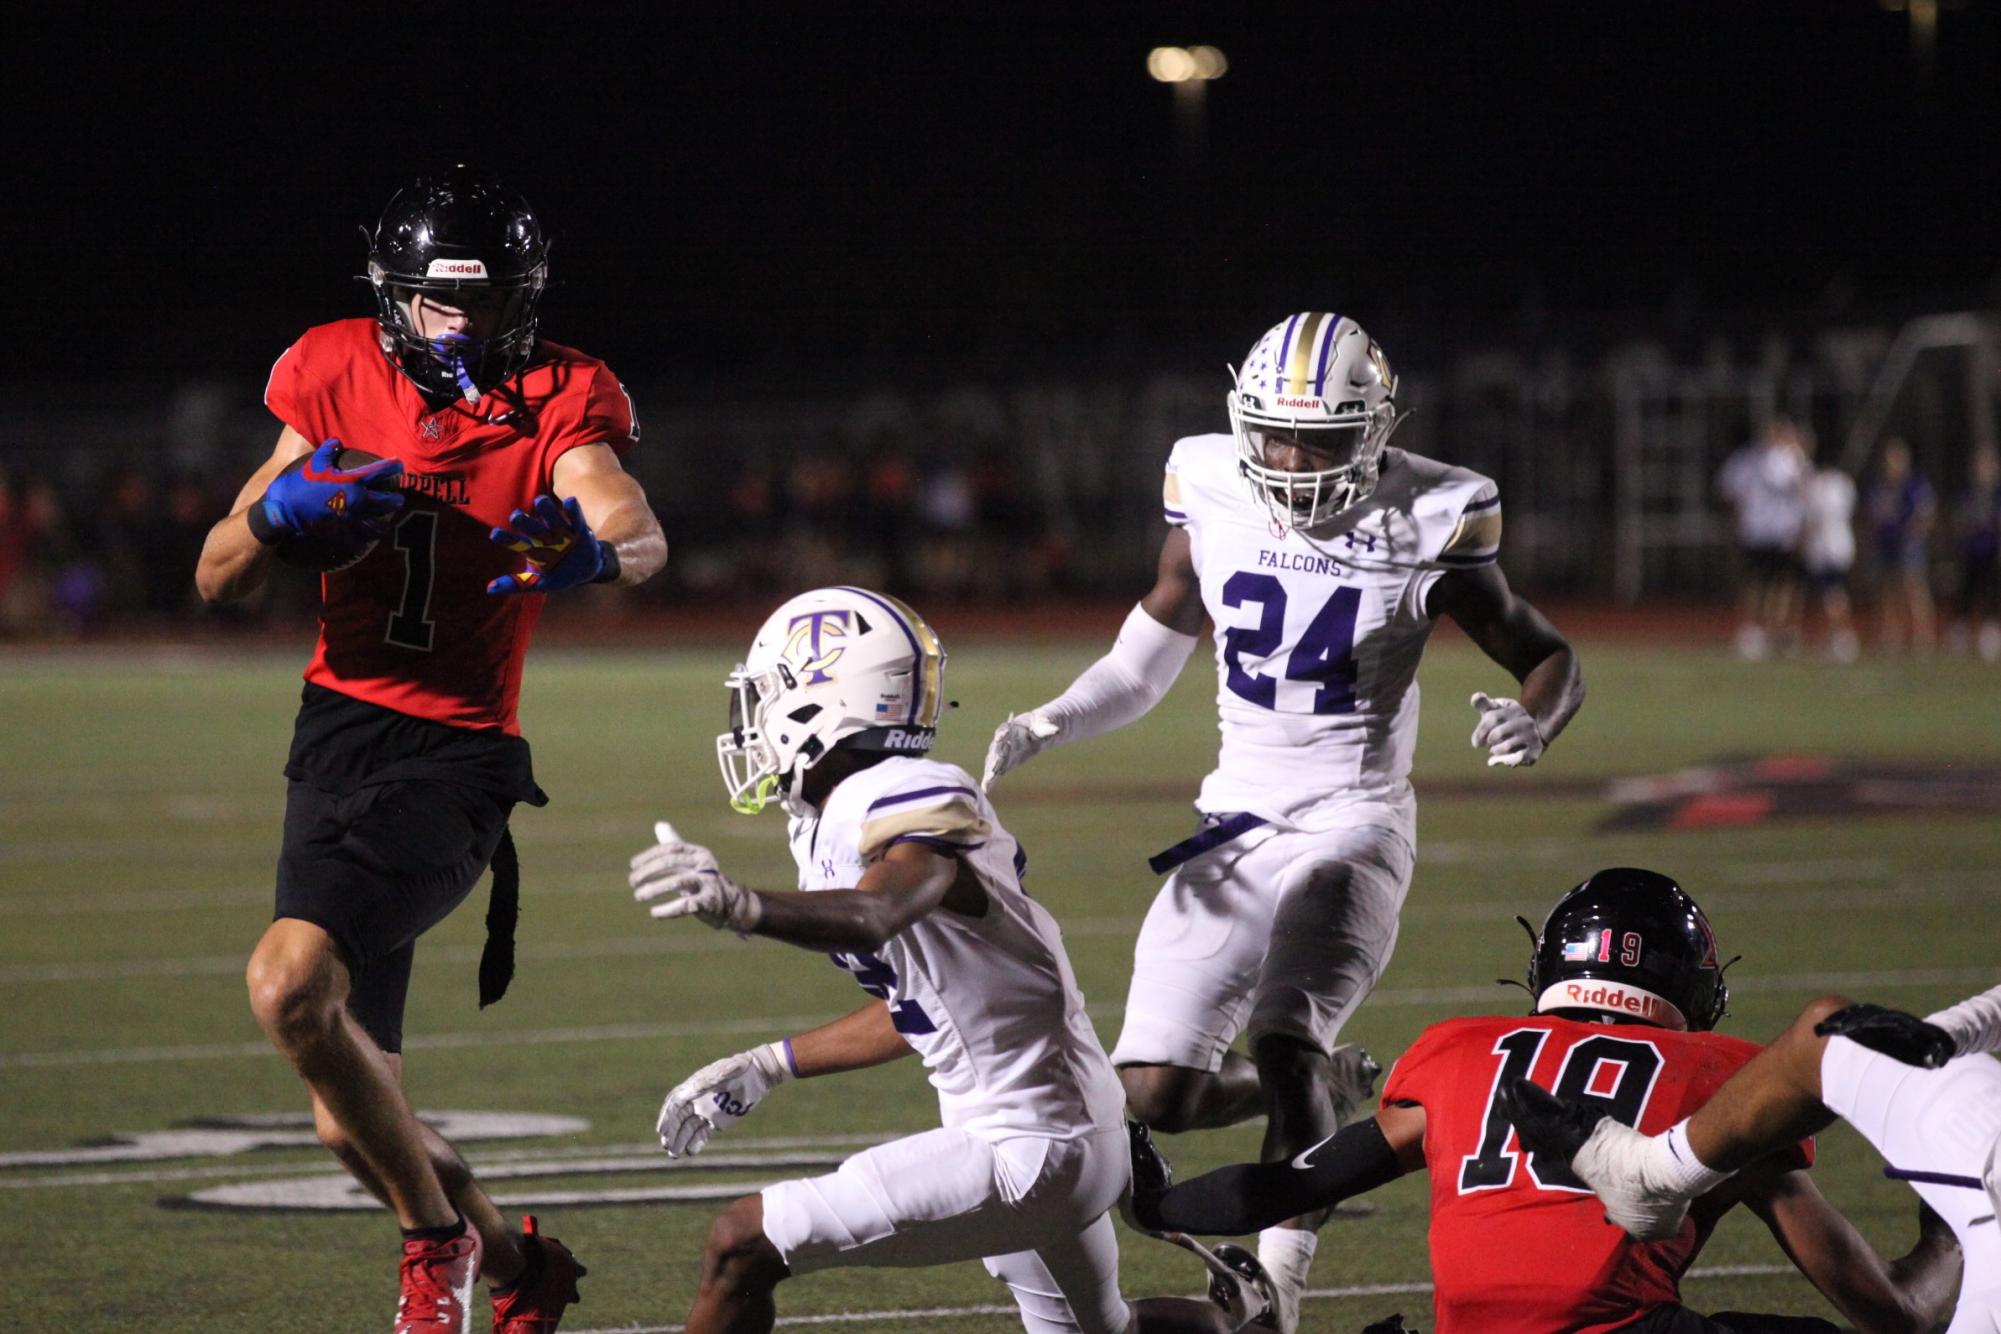 Coppell senior wide receiver Baron Tipton evades Keller Timber Creek defense at Buddy Echols Field on Friday. Friday night’s game against the Timber Creek falcons came to an abrupt end at halftime due to continuous lightning delays throughout the night; the game ended with Coppell up, 21-14